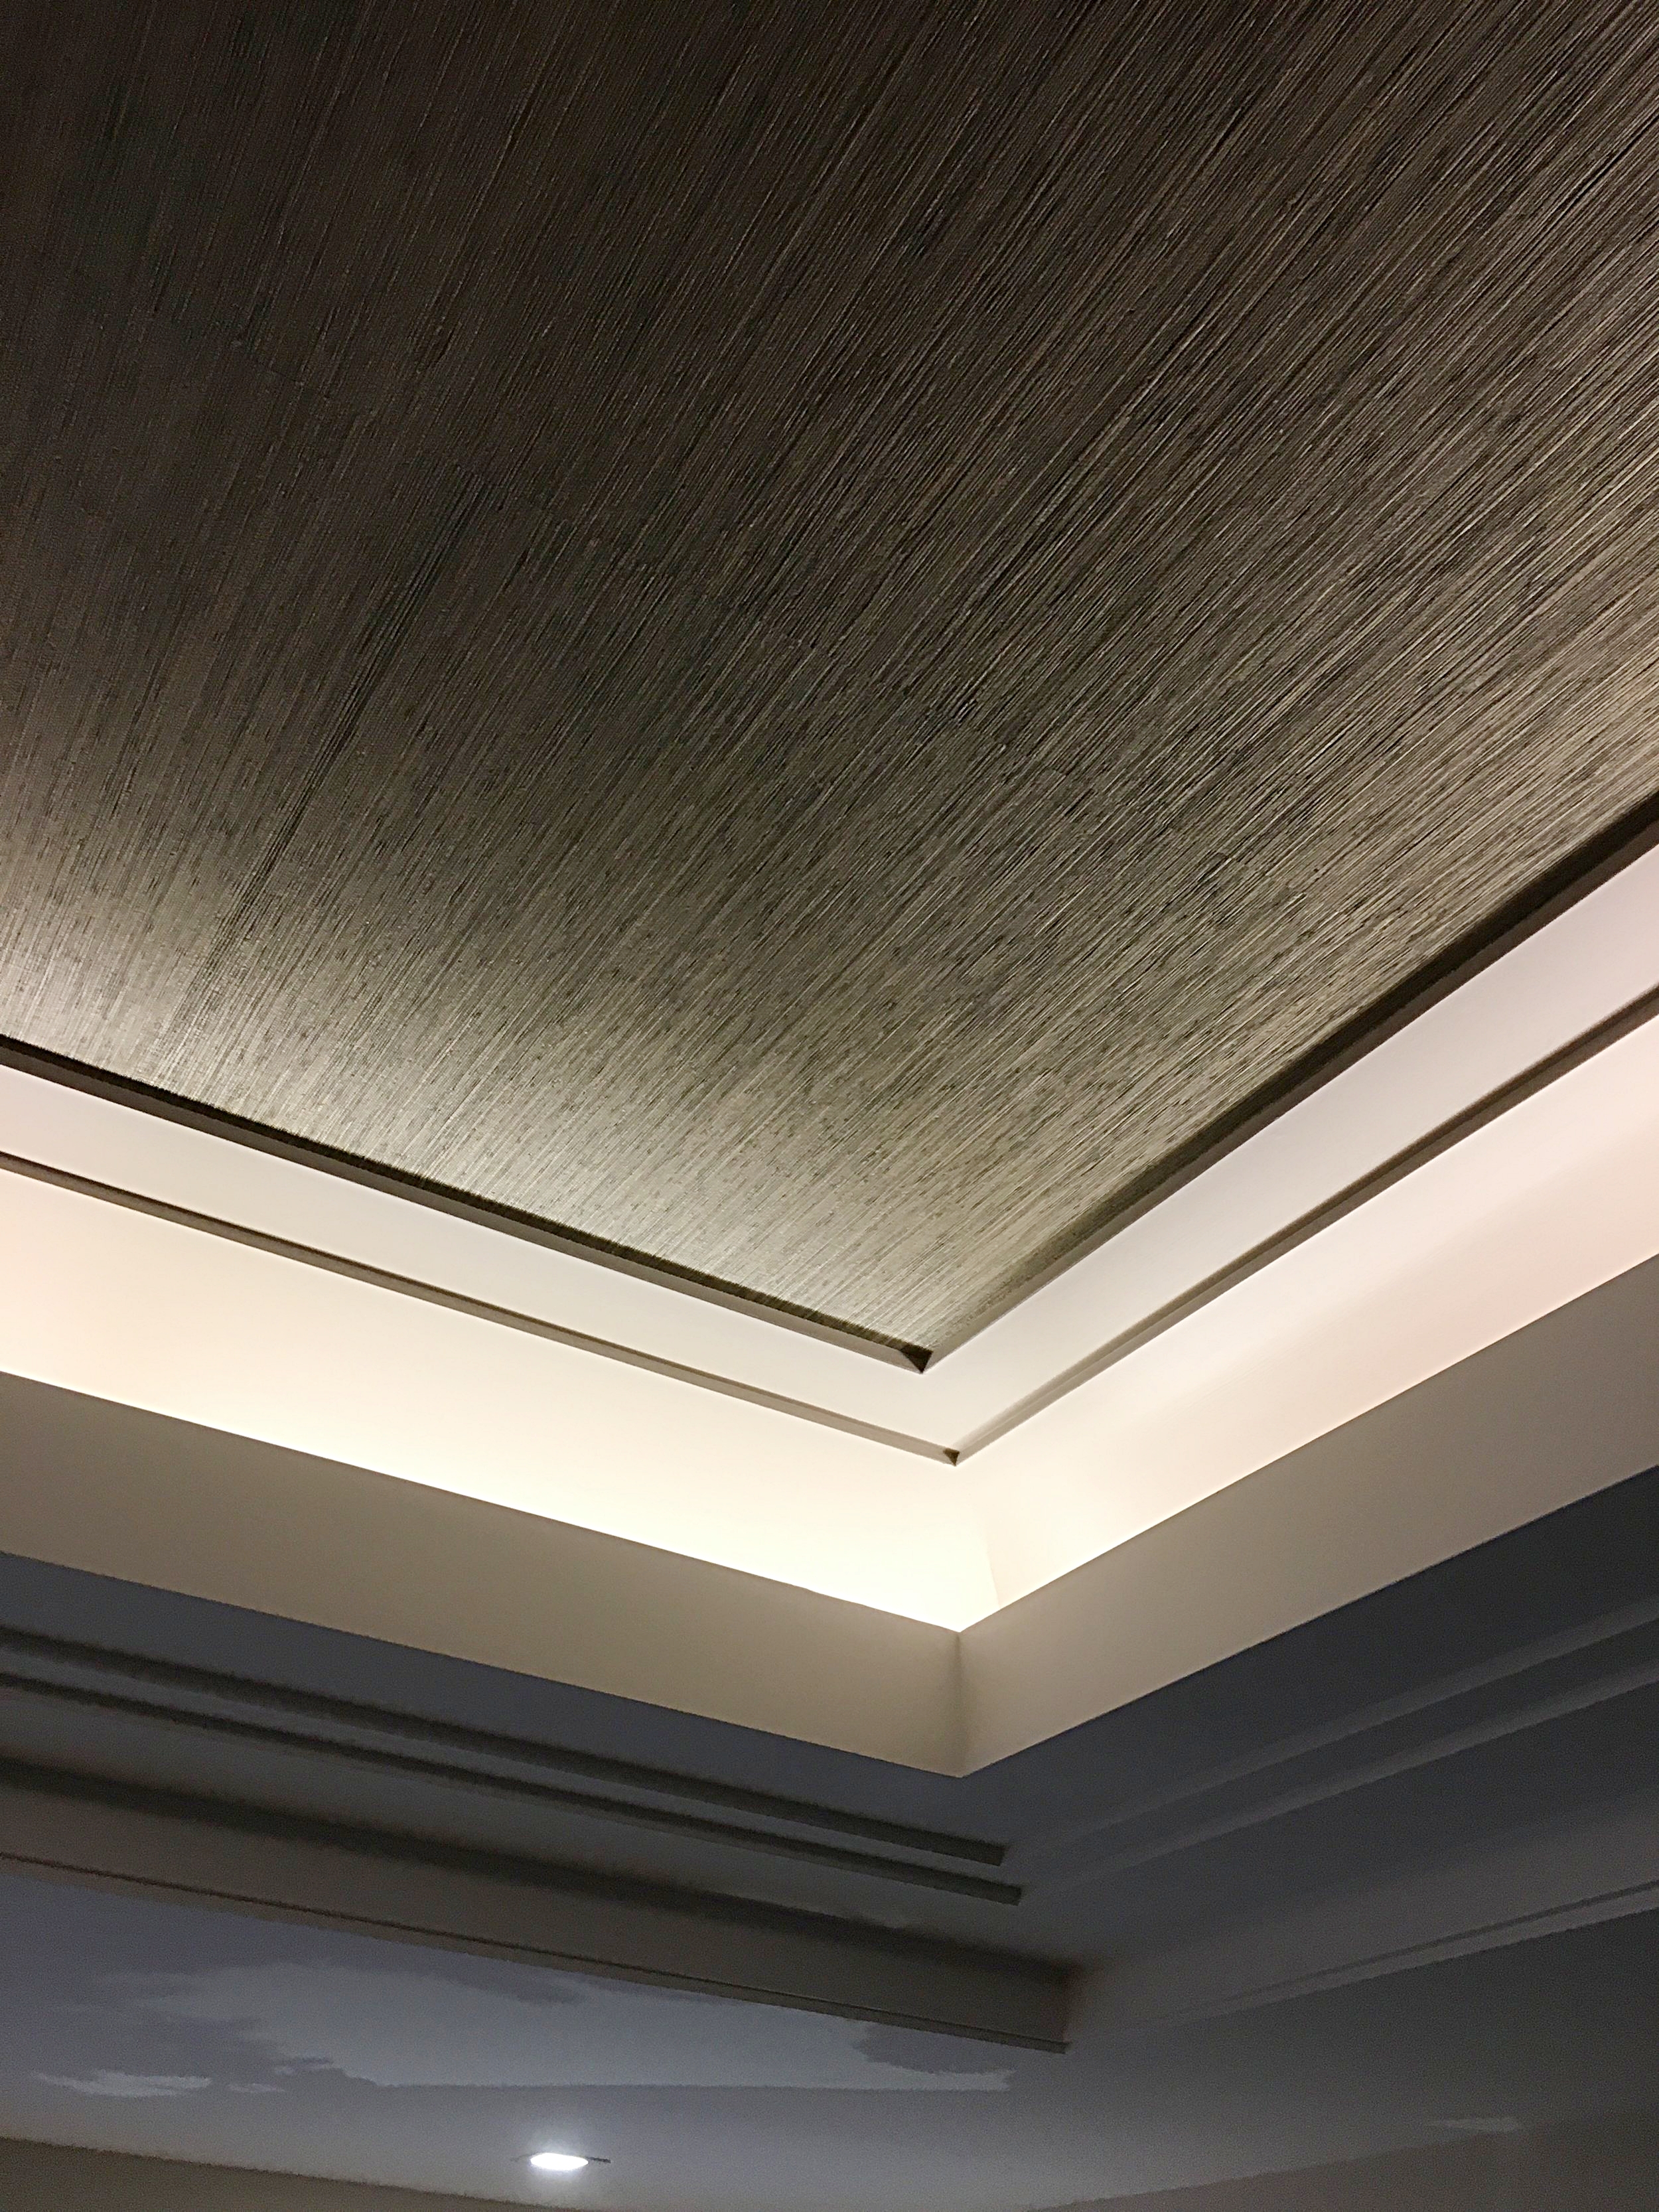 Custom tray ceiling with grass cloth as an accent.